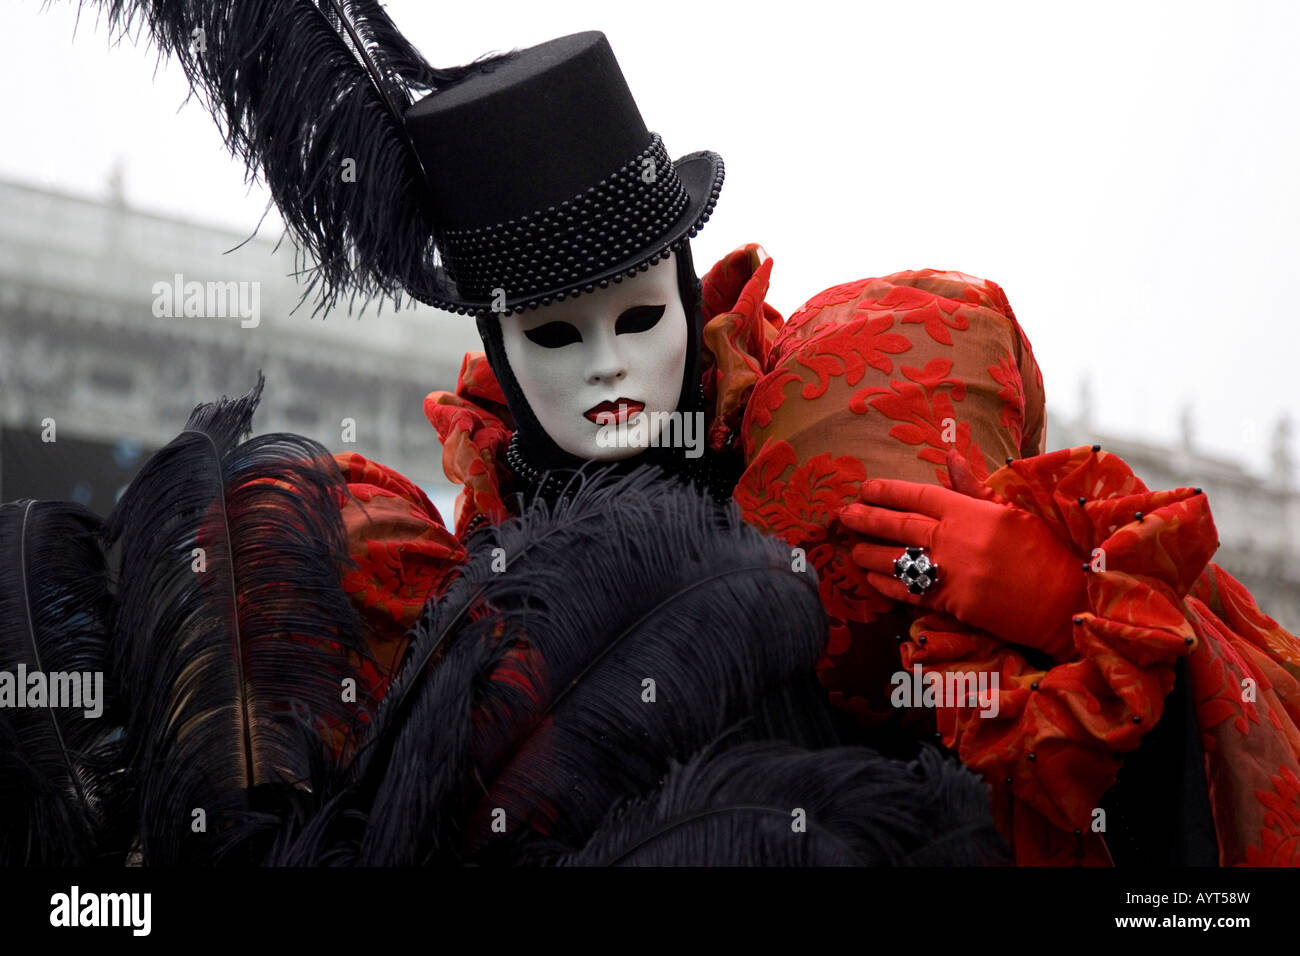 Colourful red-and-black costume and large top hat, mask and feathers,  Carnevale di Venezia, Carneval in Venice, Italy Stock Photo - Alamy